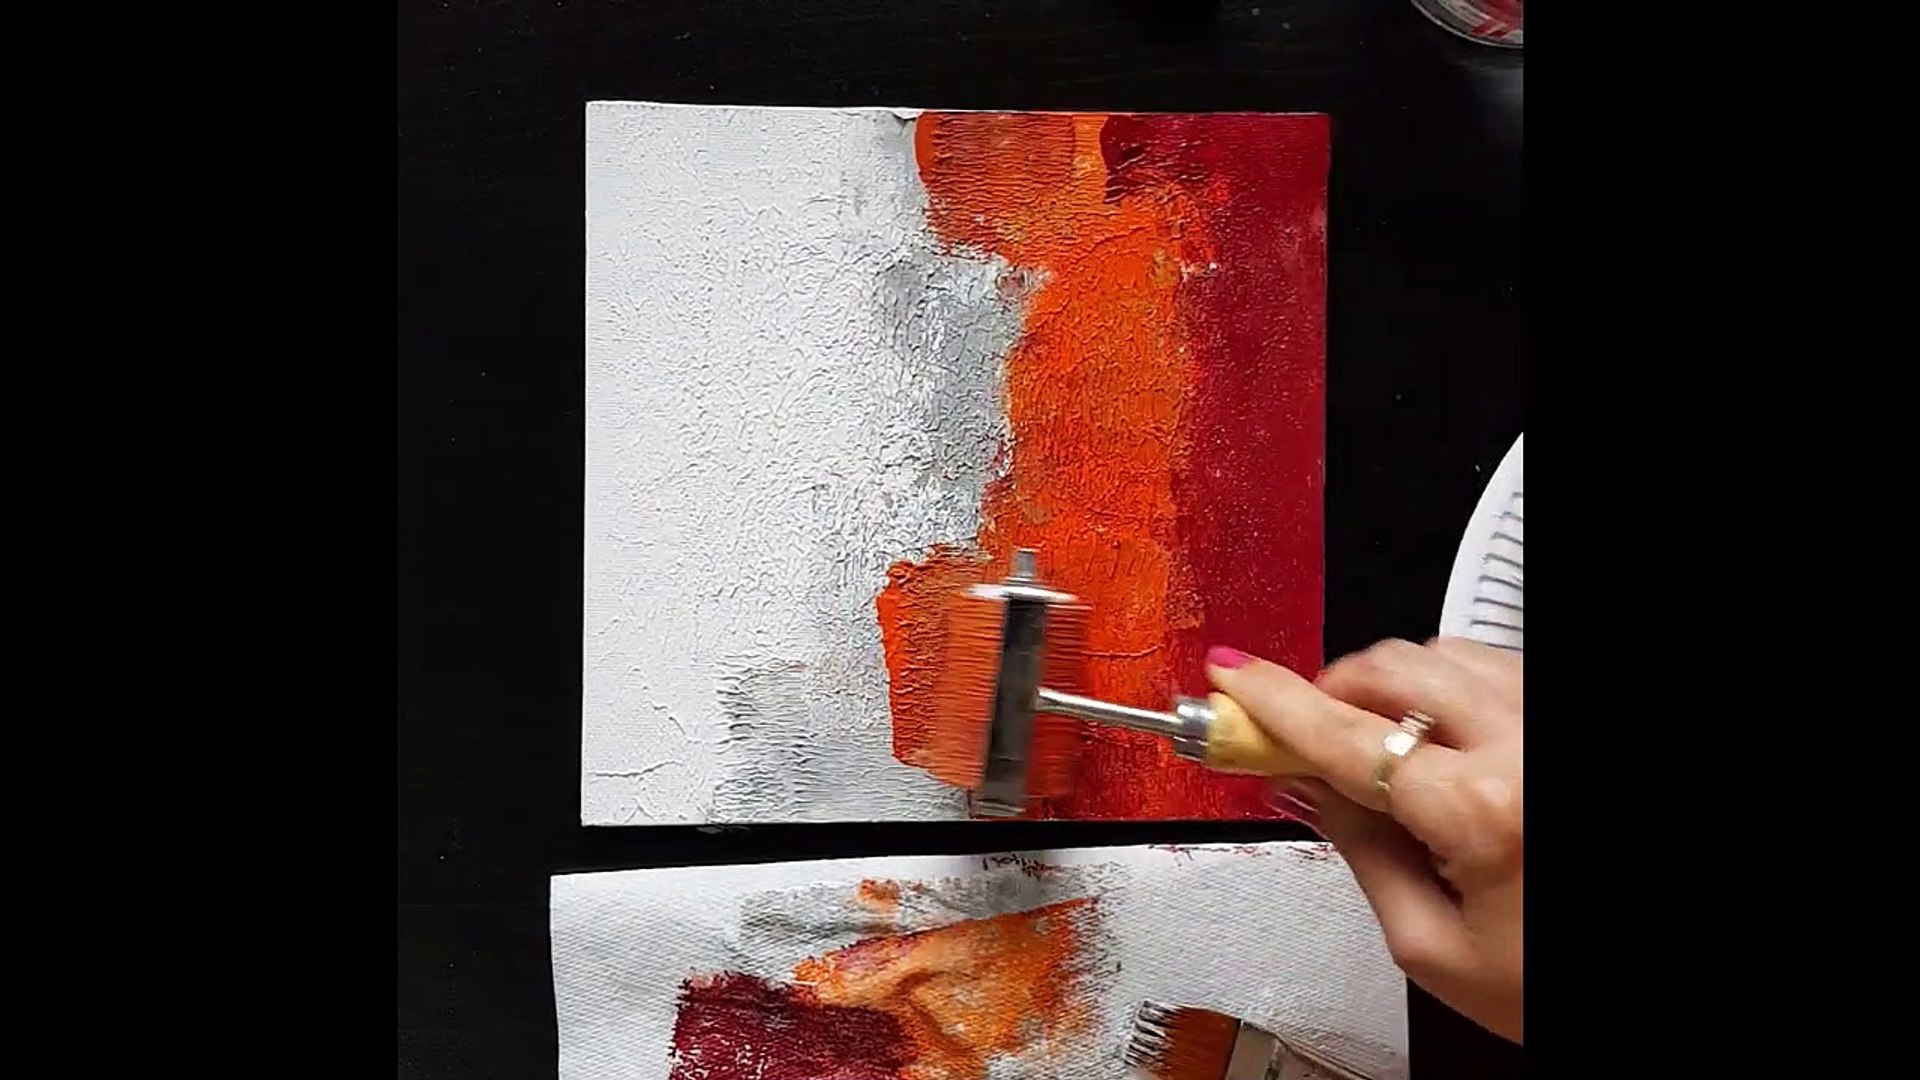 Acrylic Abstract Painting very easy for Beginners using Gesso